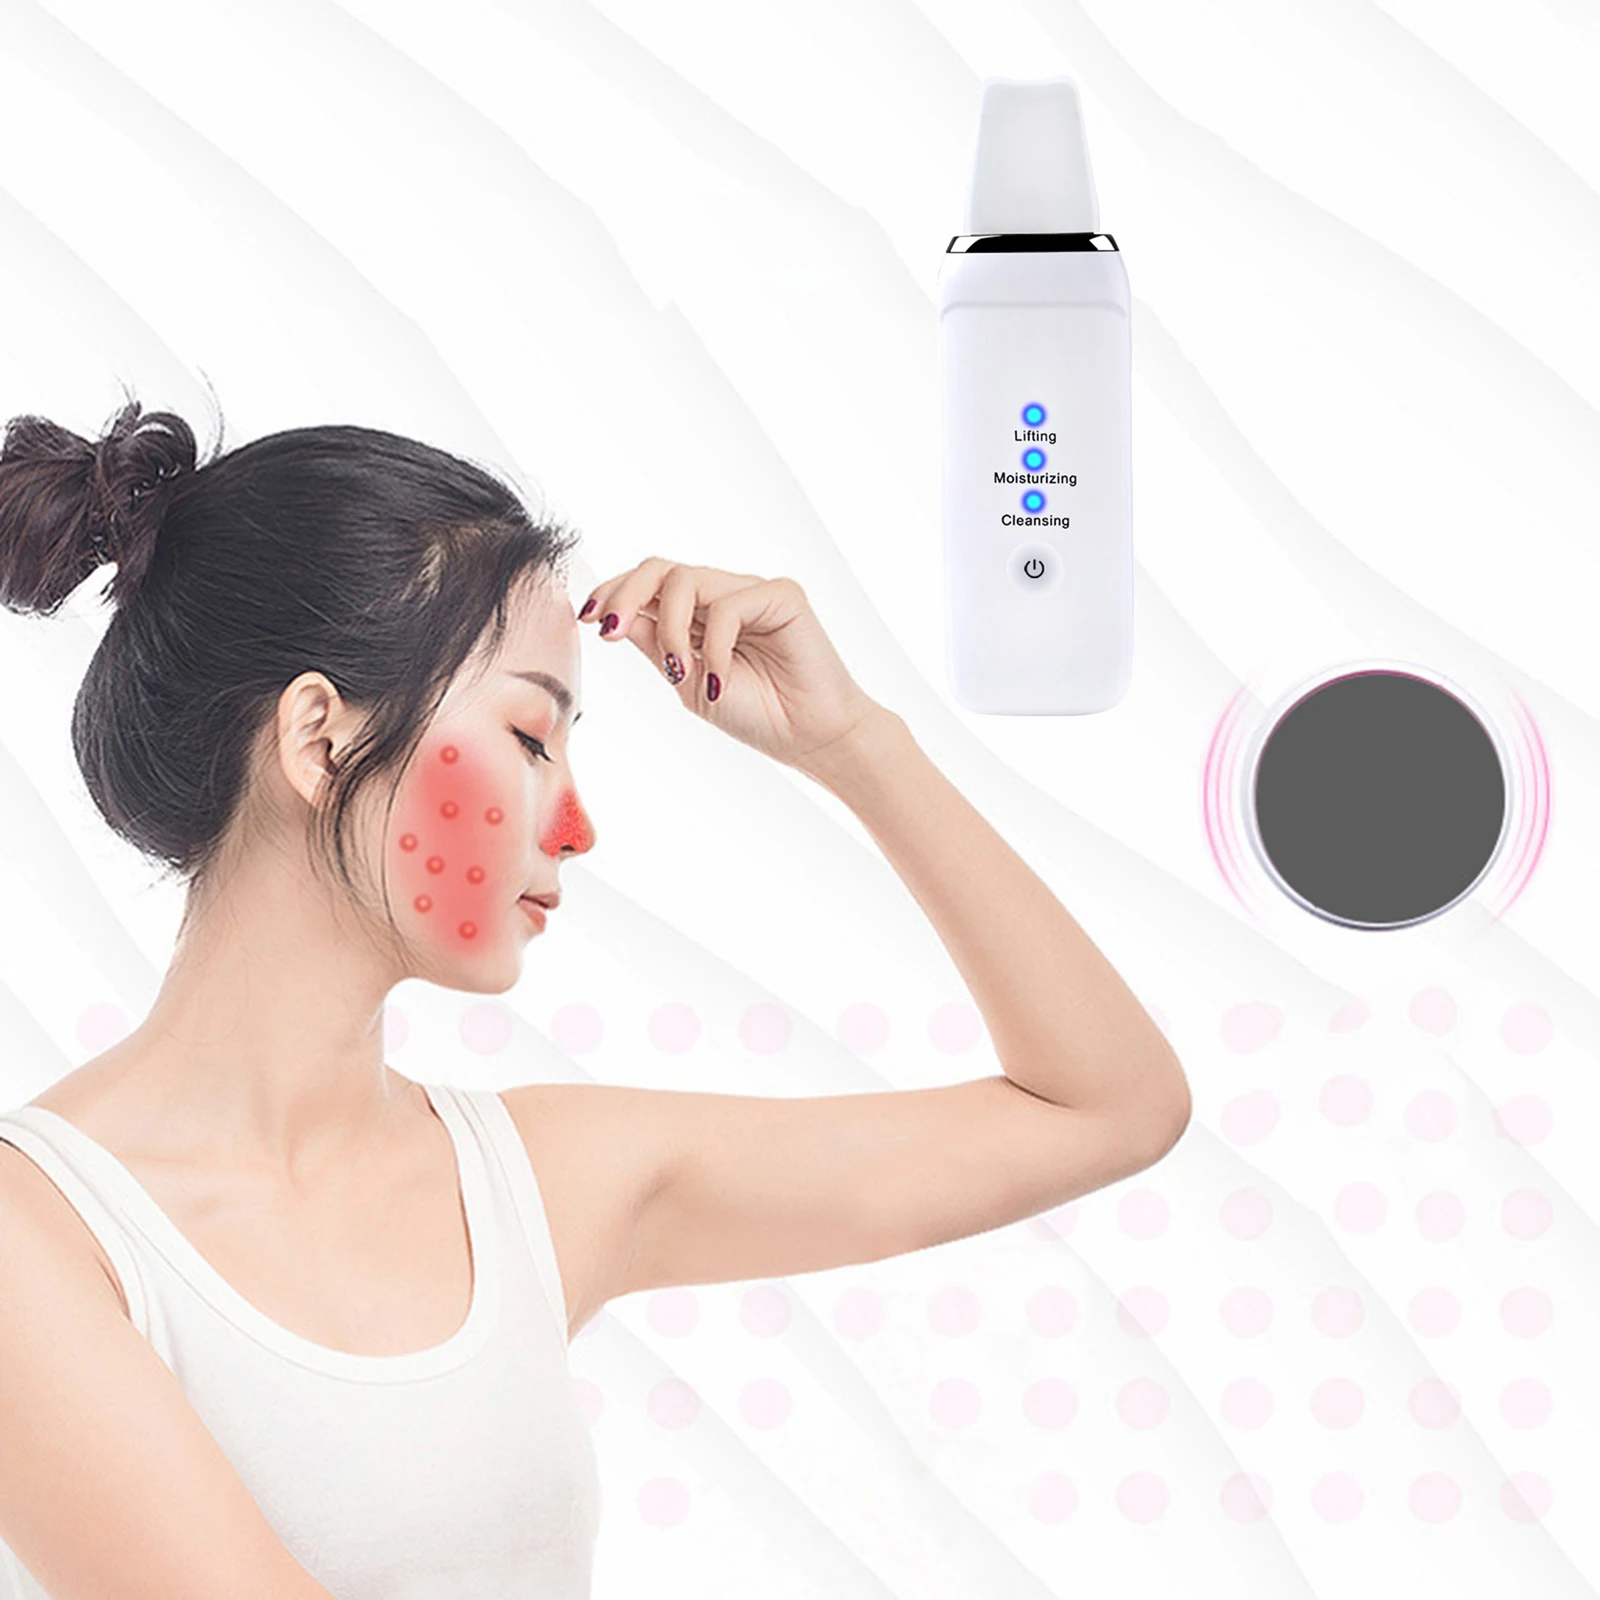 Ultrasonic Skin Scrubber Pore Cleaner with 3 Modes Face Beauty Lifting Tool